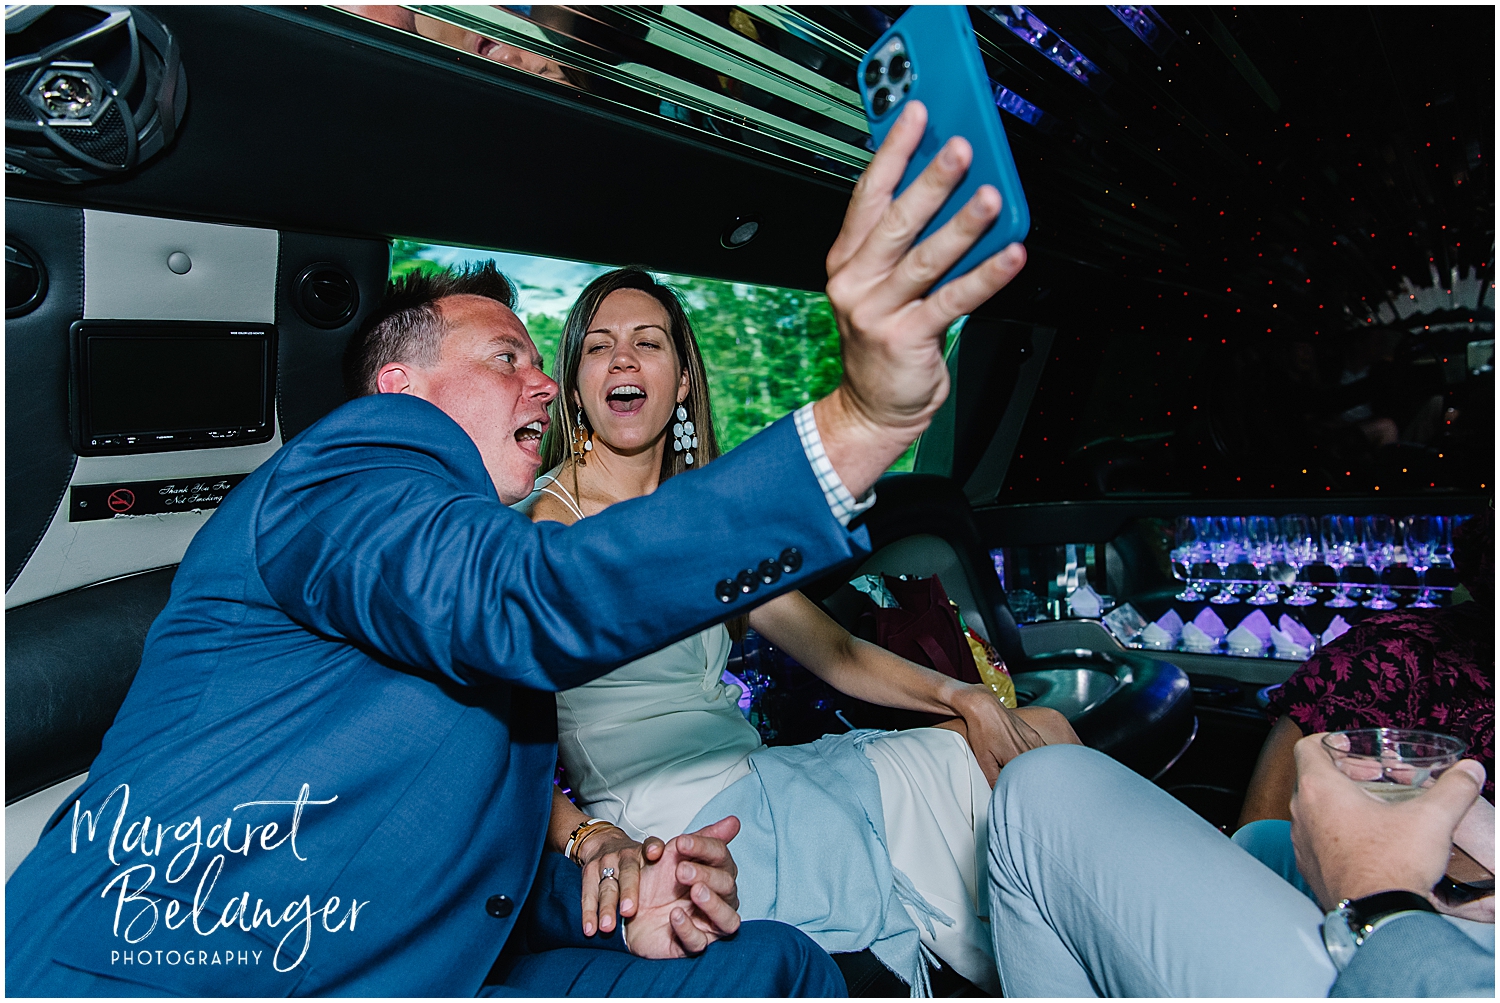 The bride and groom sing along to music while riding in a limousine.